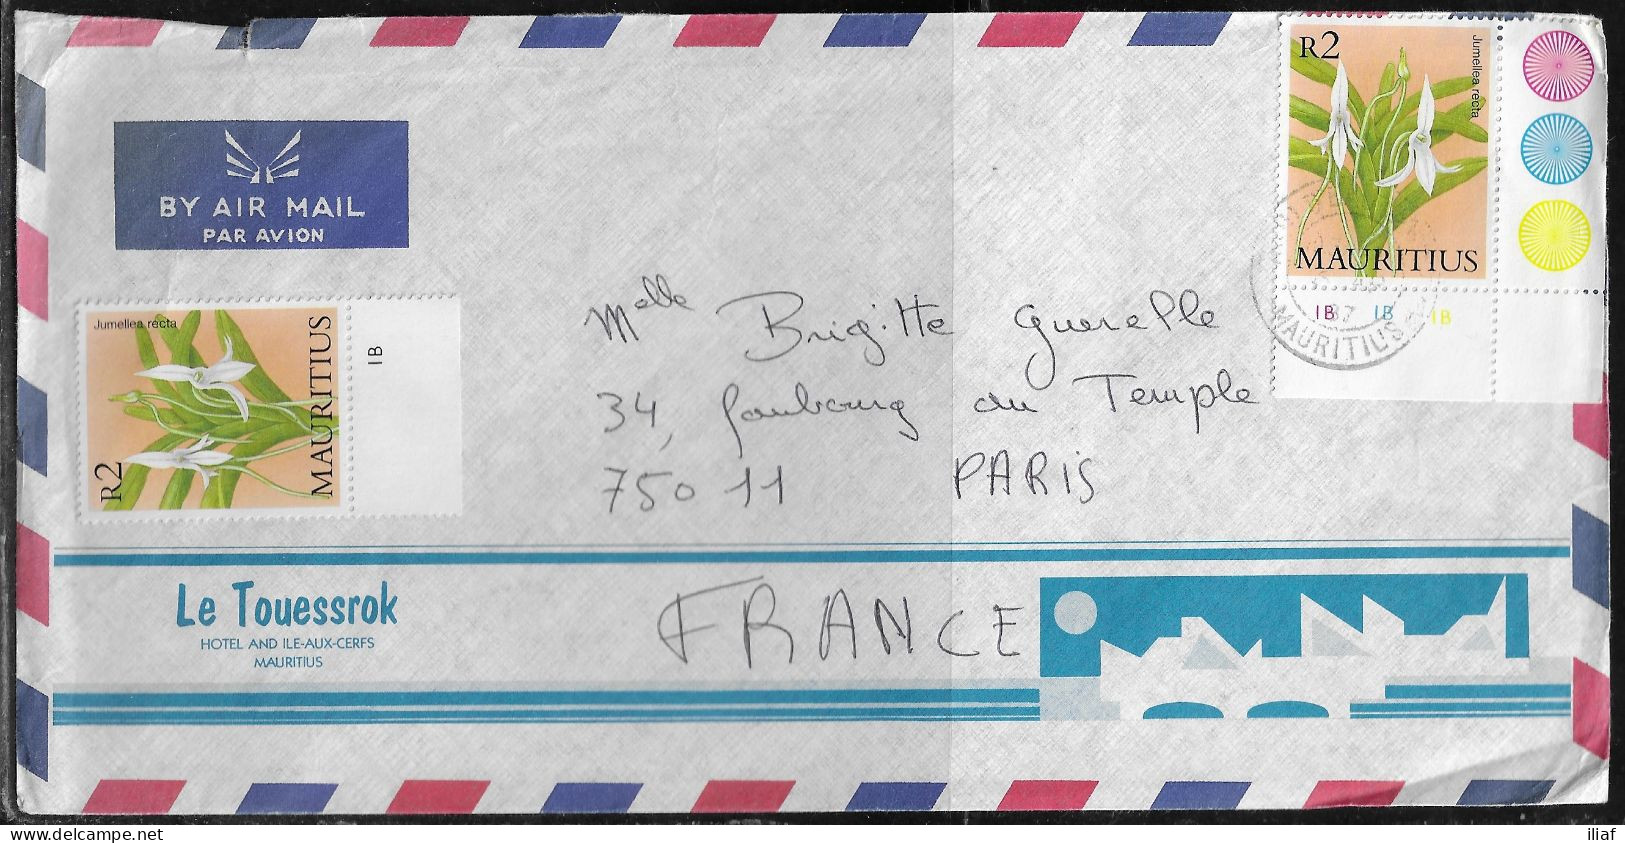 Mauritius. Stamps Sc. 635 On Air Mail Letter, Sent From Mauritius At 15.04.1987 To France. - Maurice (1968-...)